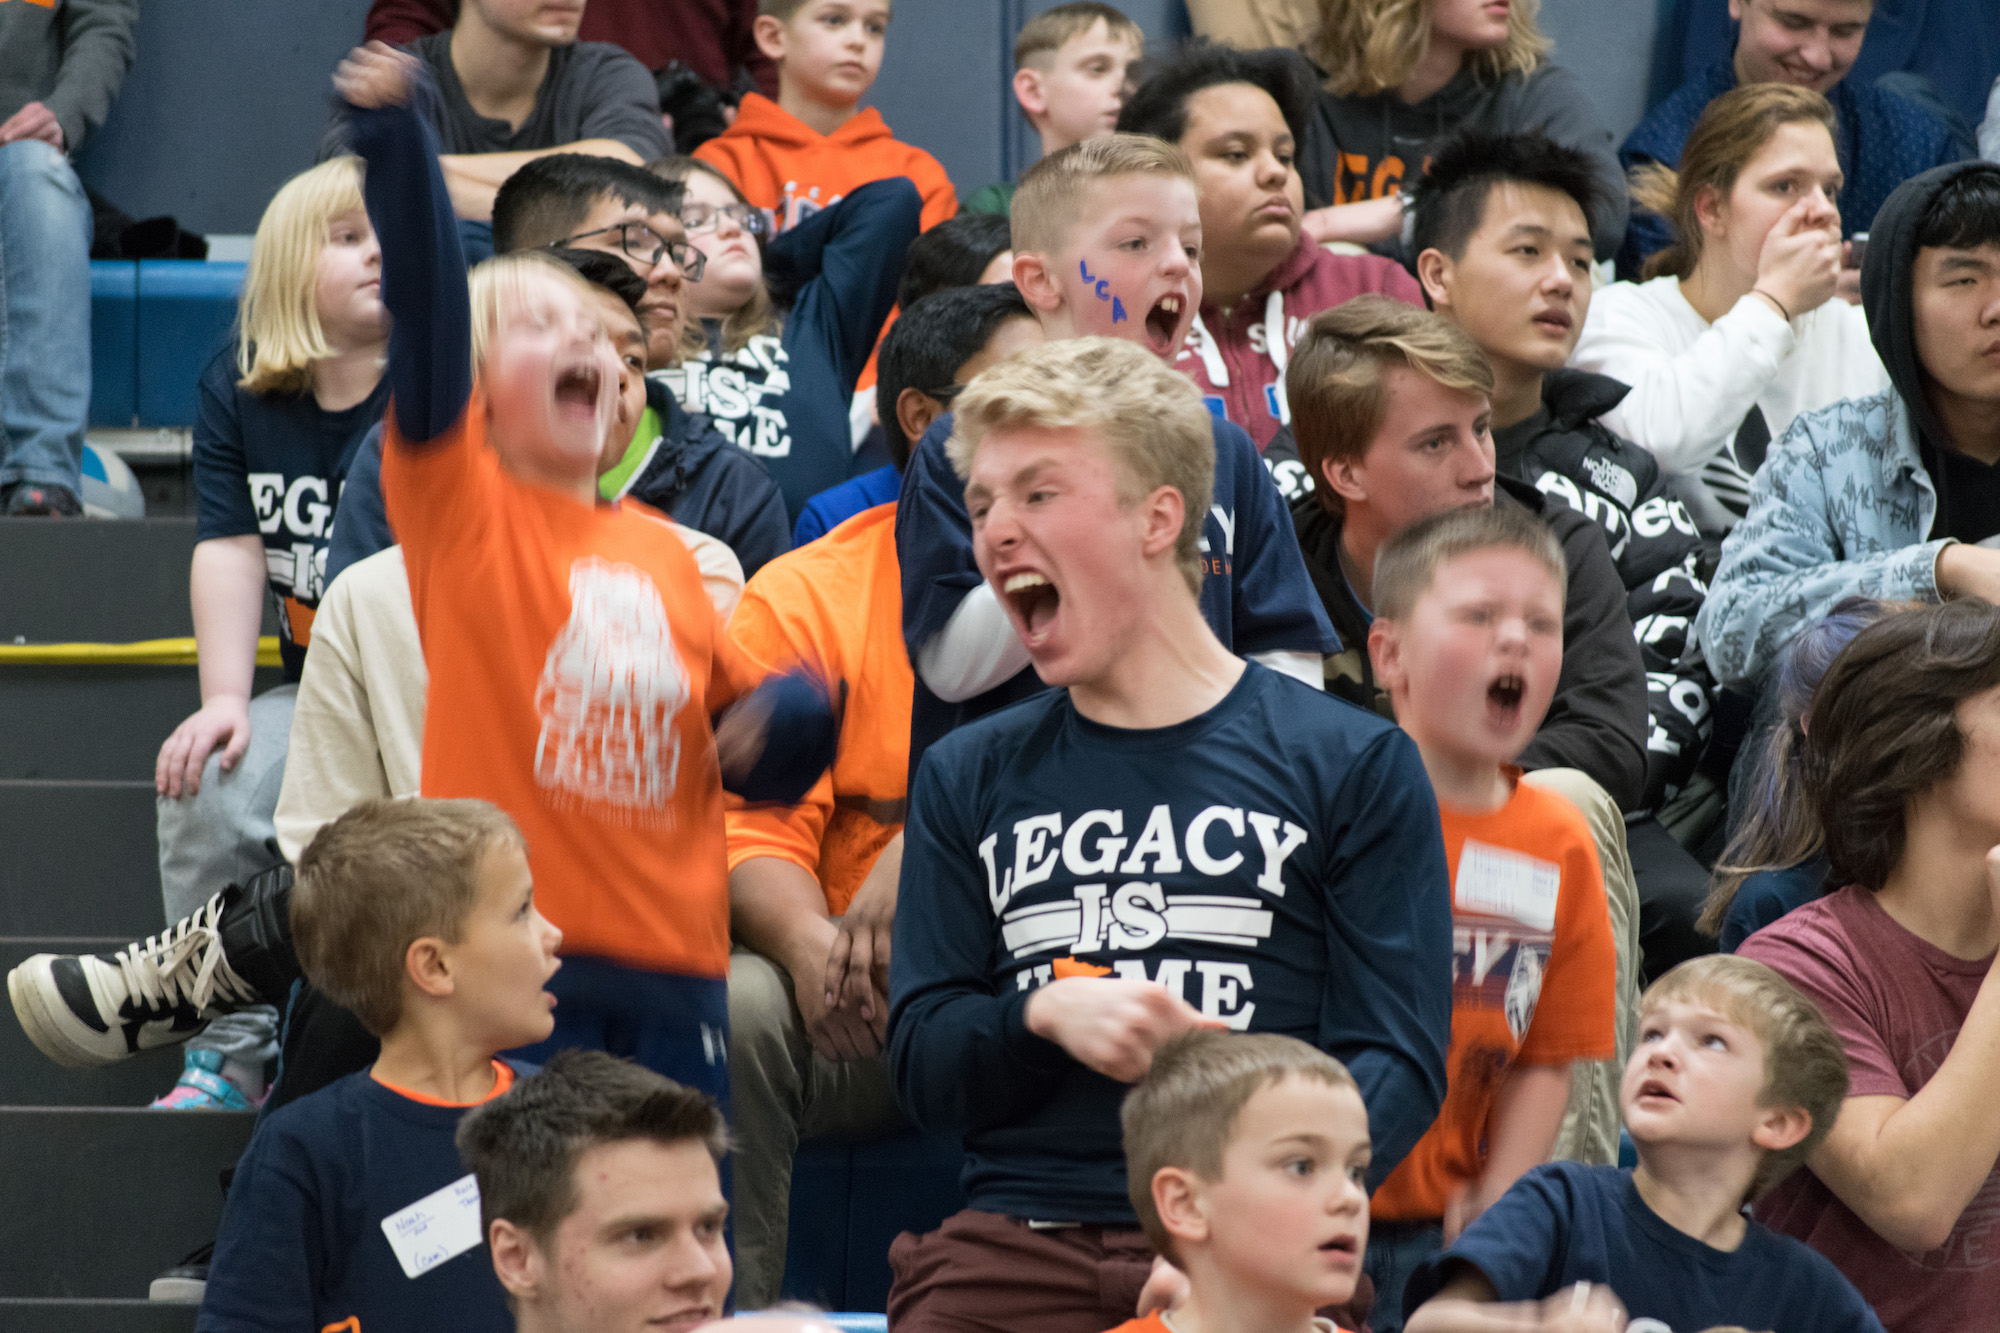 Homecoming 2018 – LEGACY IS HOME!  Legacy Christian Academy